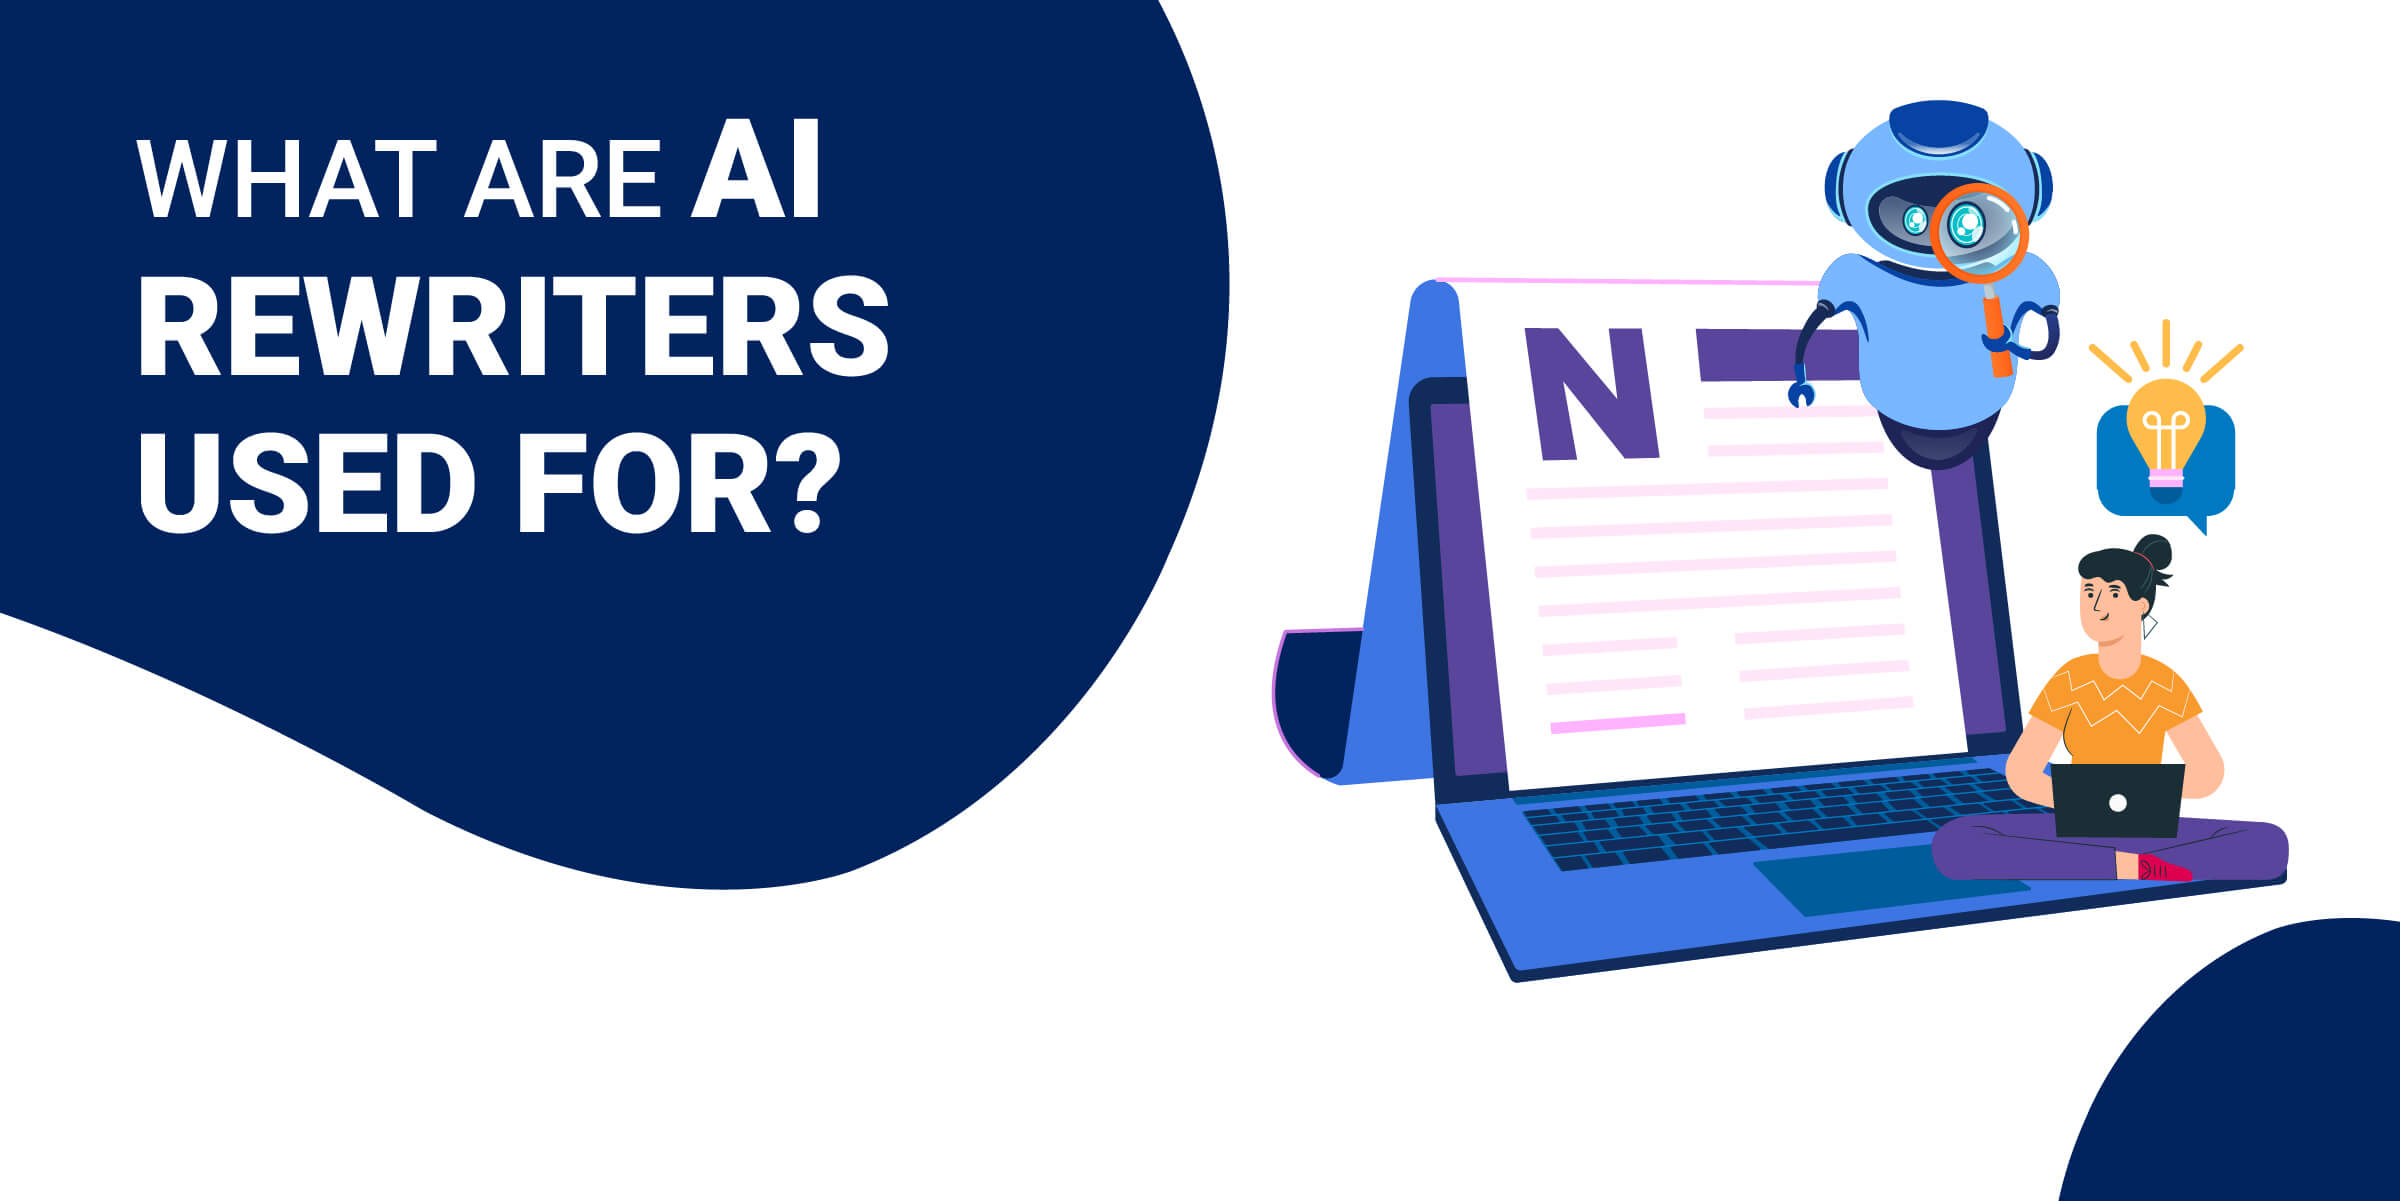 What Are AI Rewriters Used For